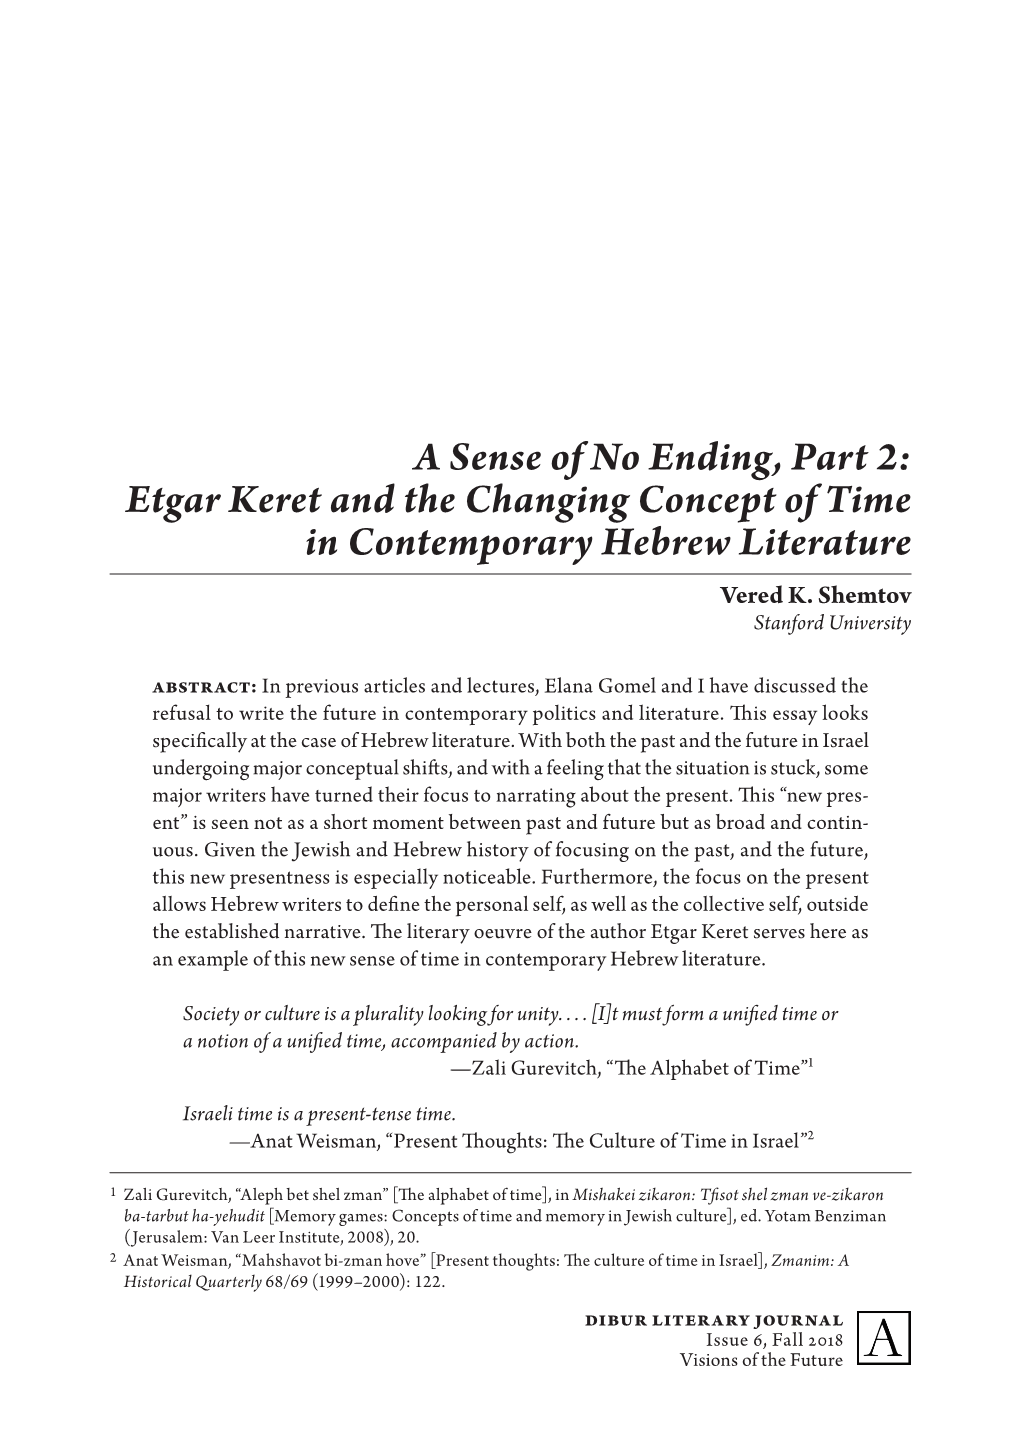 Etgar Keret and the Changing Concept of Time in Contemporary Hebrew Literature Vered K